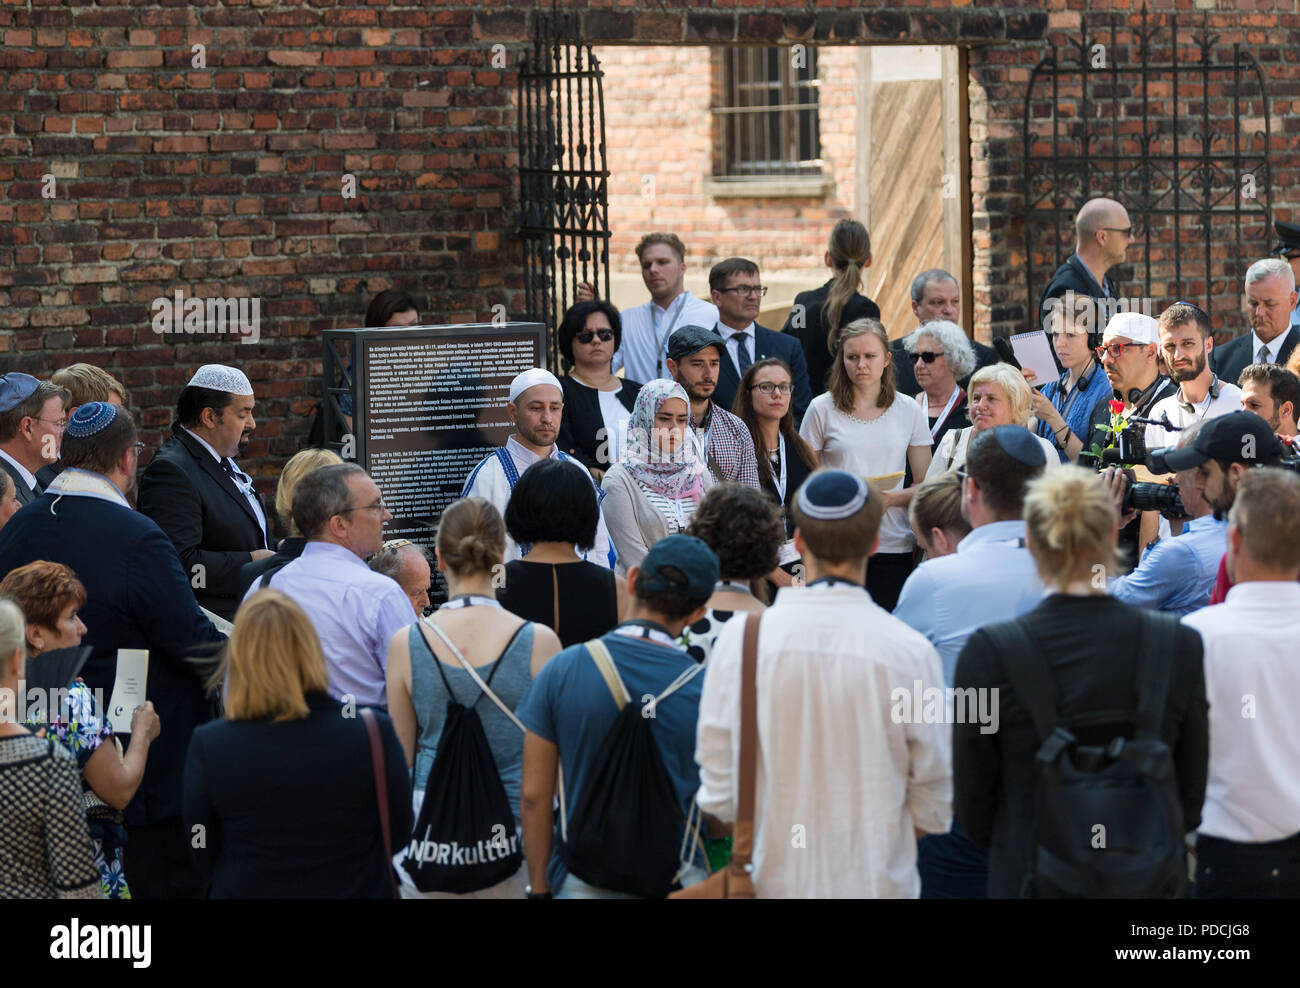 Oswiecim, Poland. 09th Aug, 2018. Jews, Muslims and politicians commemorate the victims of the Holocaust together in the largest former German concentration camp Auschwitz. The commemoration takes place within the framework of an educational trip organised by the Central Council of Muslims (ZMD) in Germany and the Union of Progressive Jews (UdJ). Credit: Monika Skolimowska/dpa-Zentralbild/dpa/Alamy Live News Stock Photo